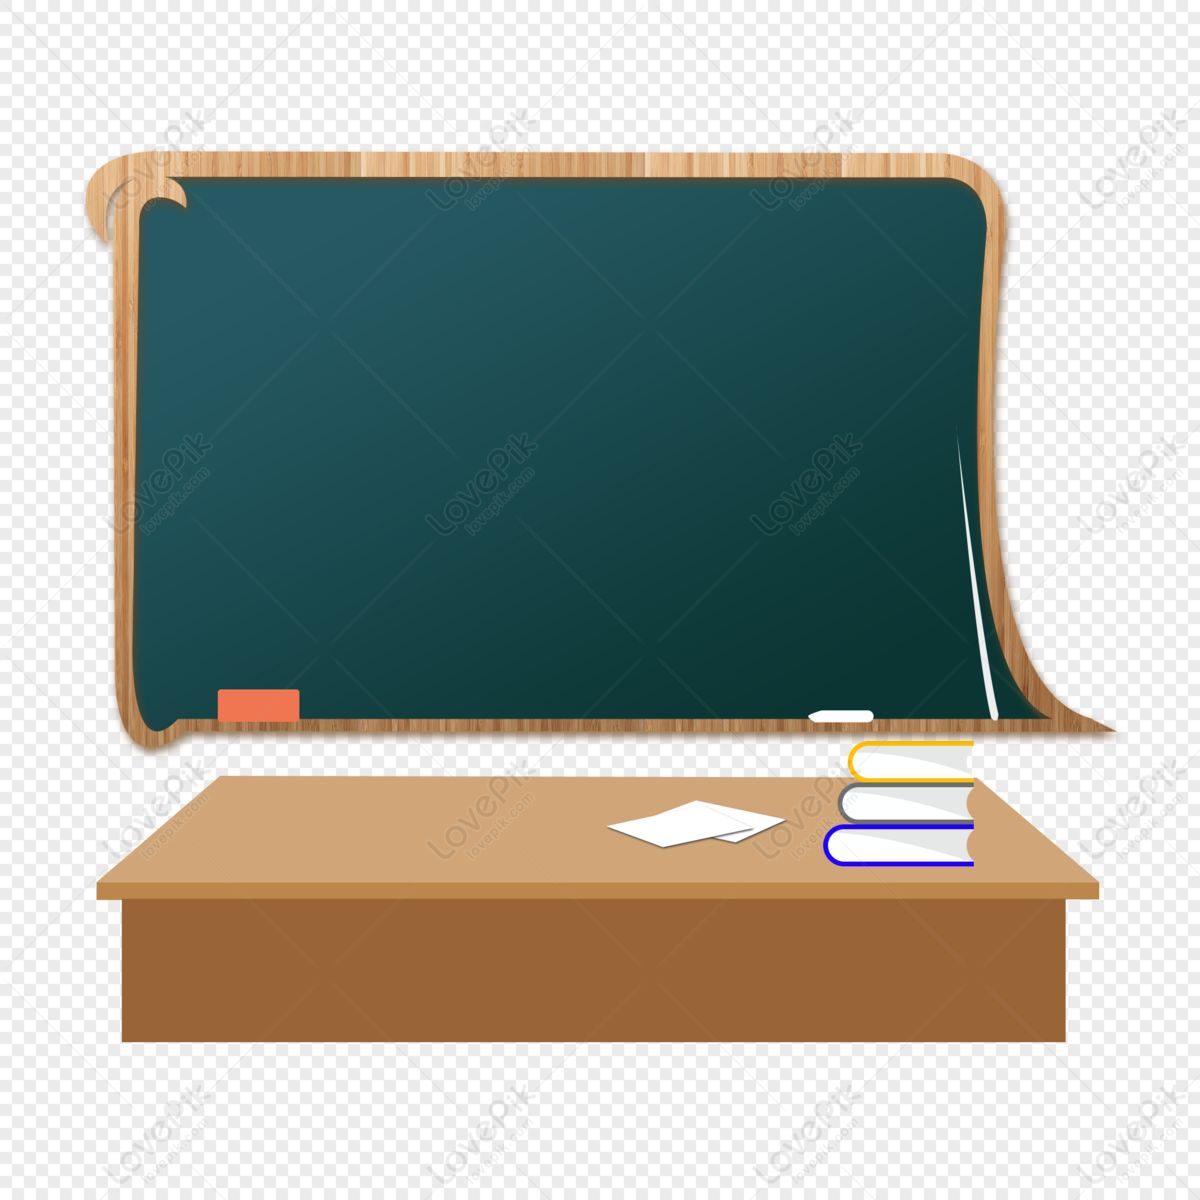 Cartoon Classroom Blackboard PNG Image Free Download And Clipart Image For  Free Download - Lovepik | 400466631